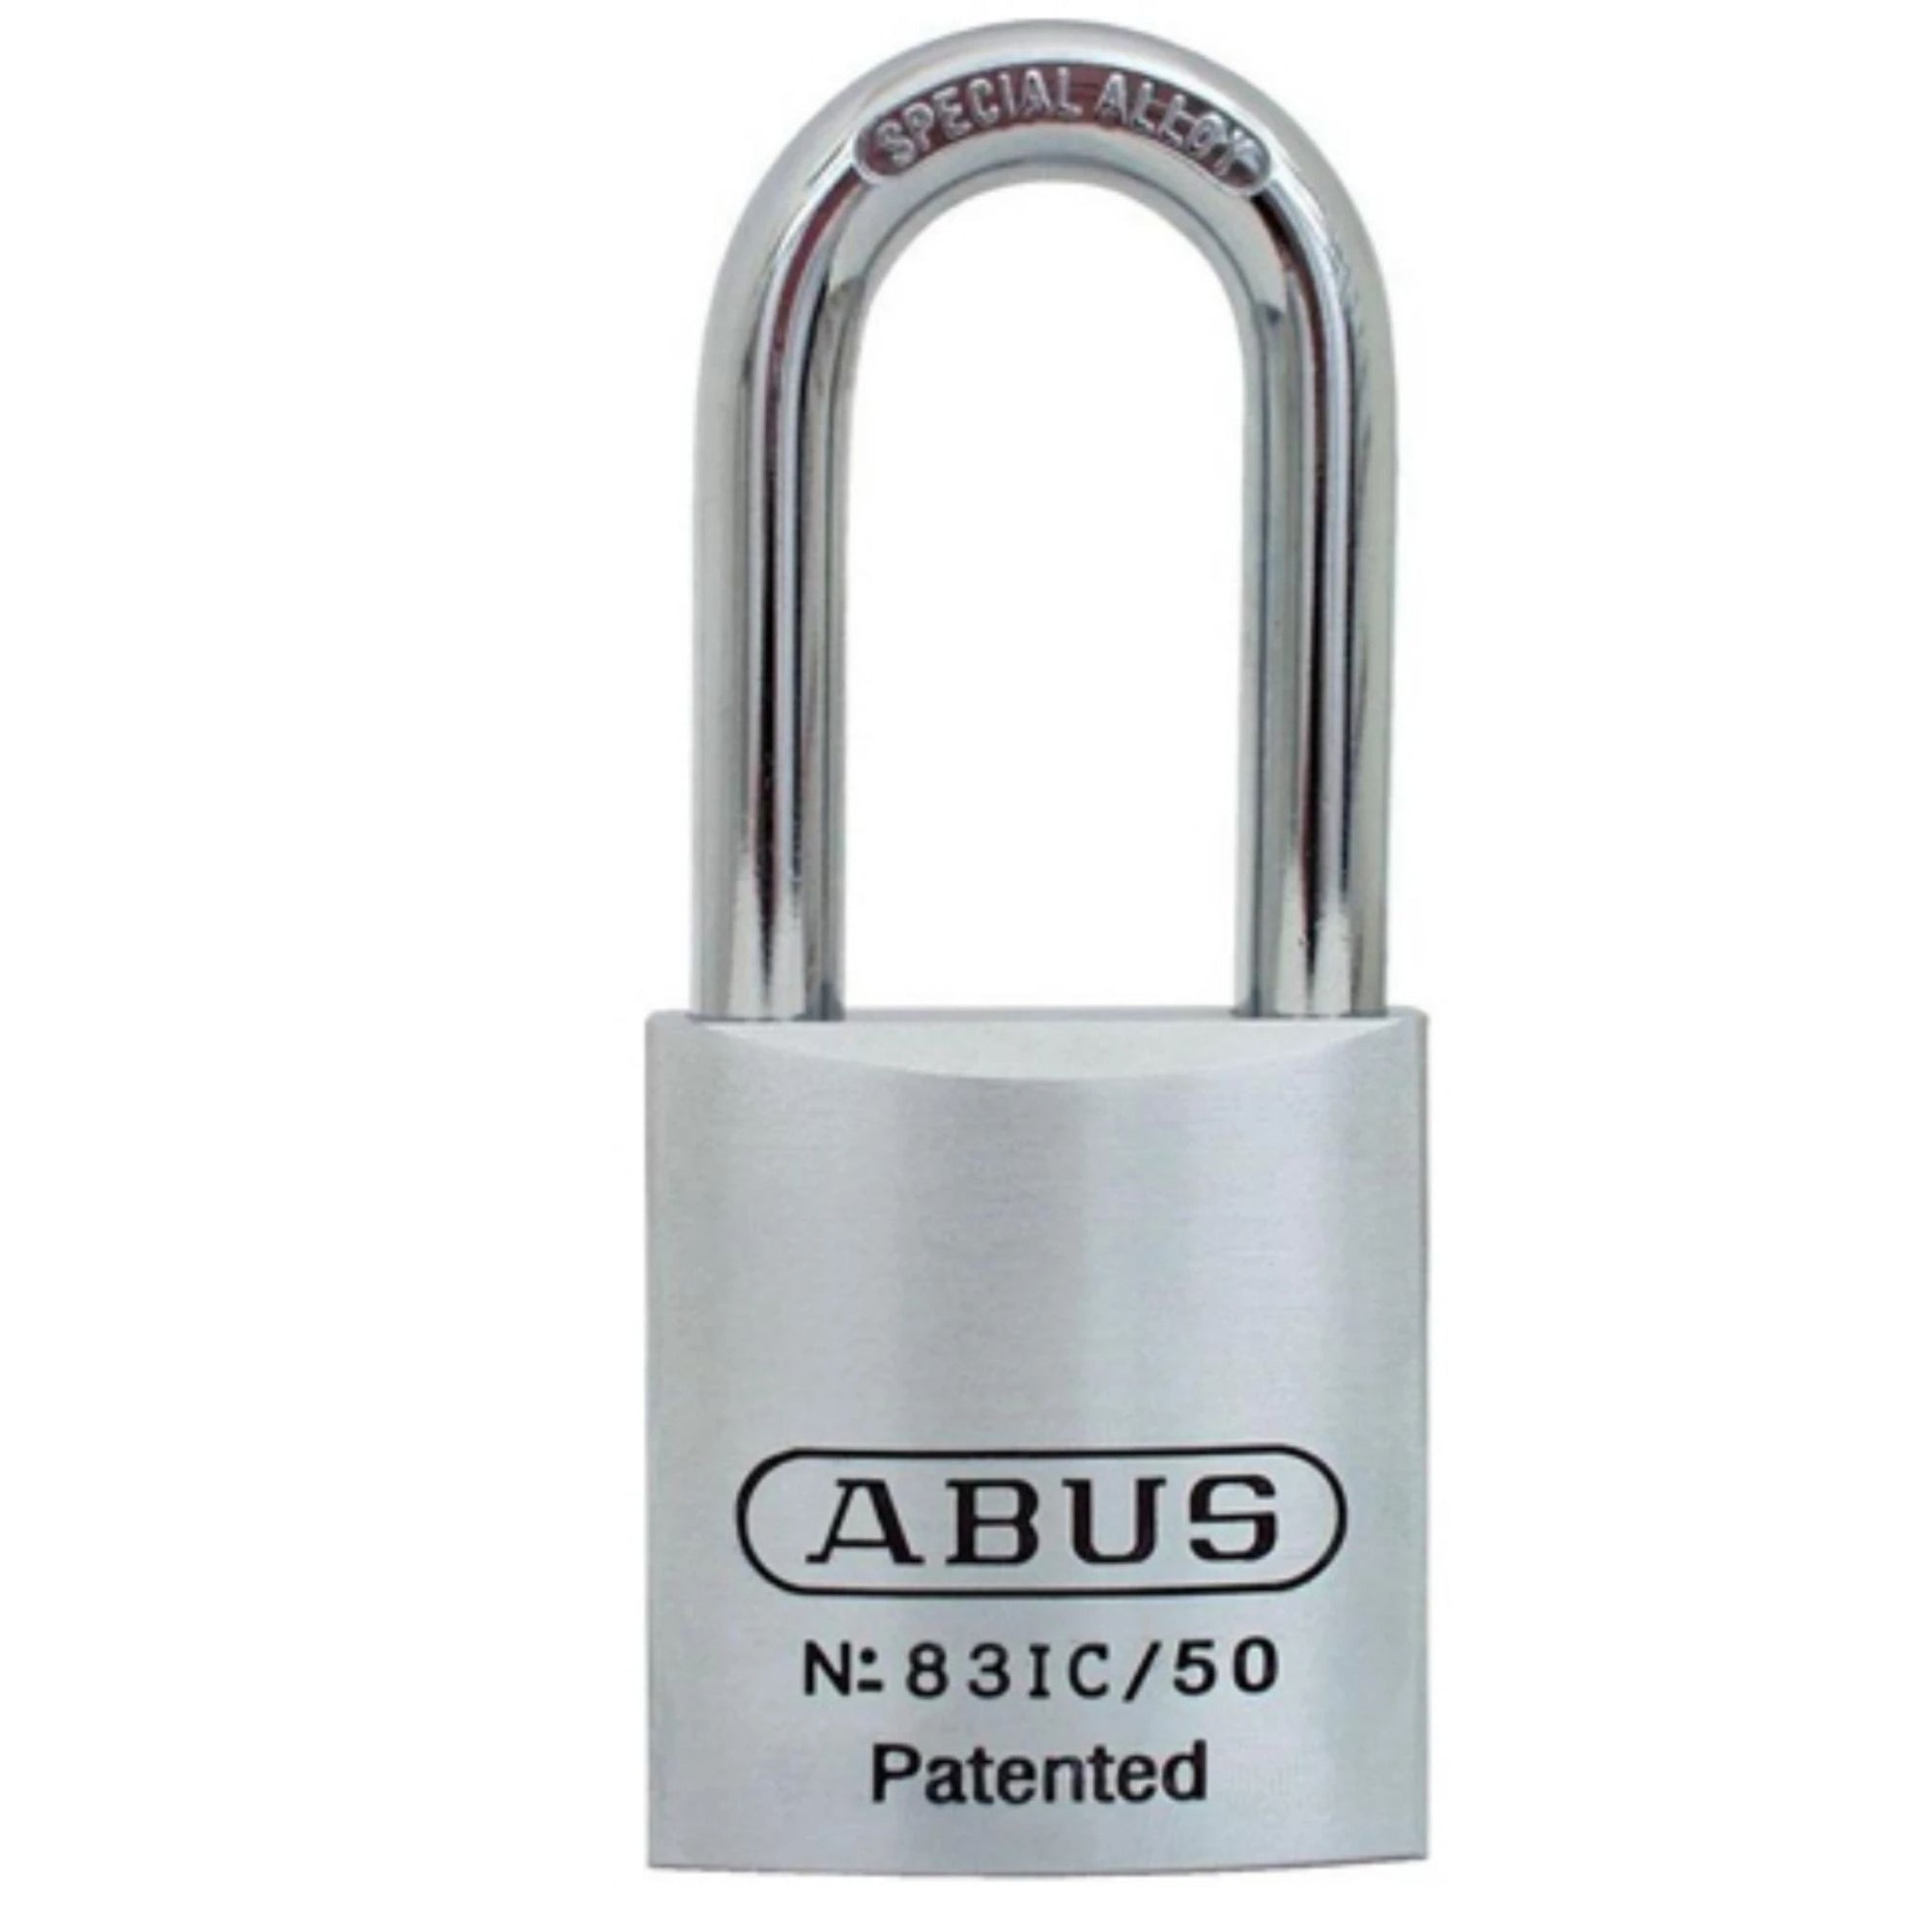 Abus 83IC/50 Chrome Lock Fits OEM Small Format IC Cores with 4-Inch Shackle - The Lock Source